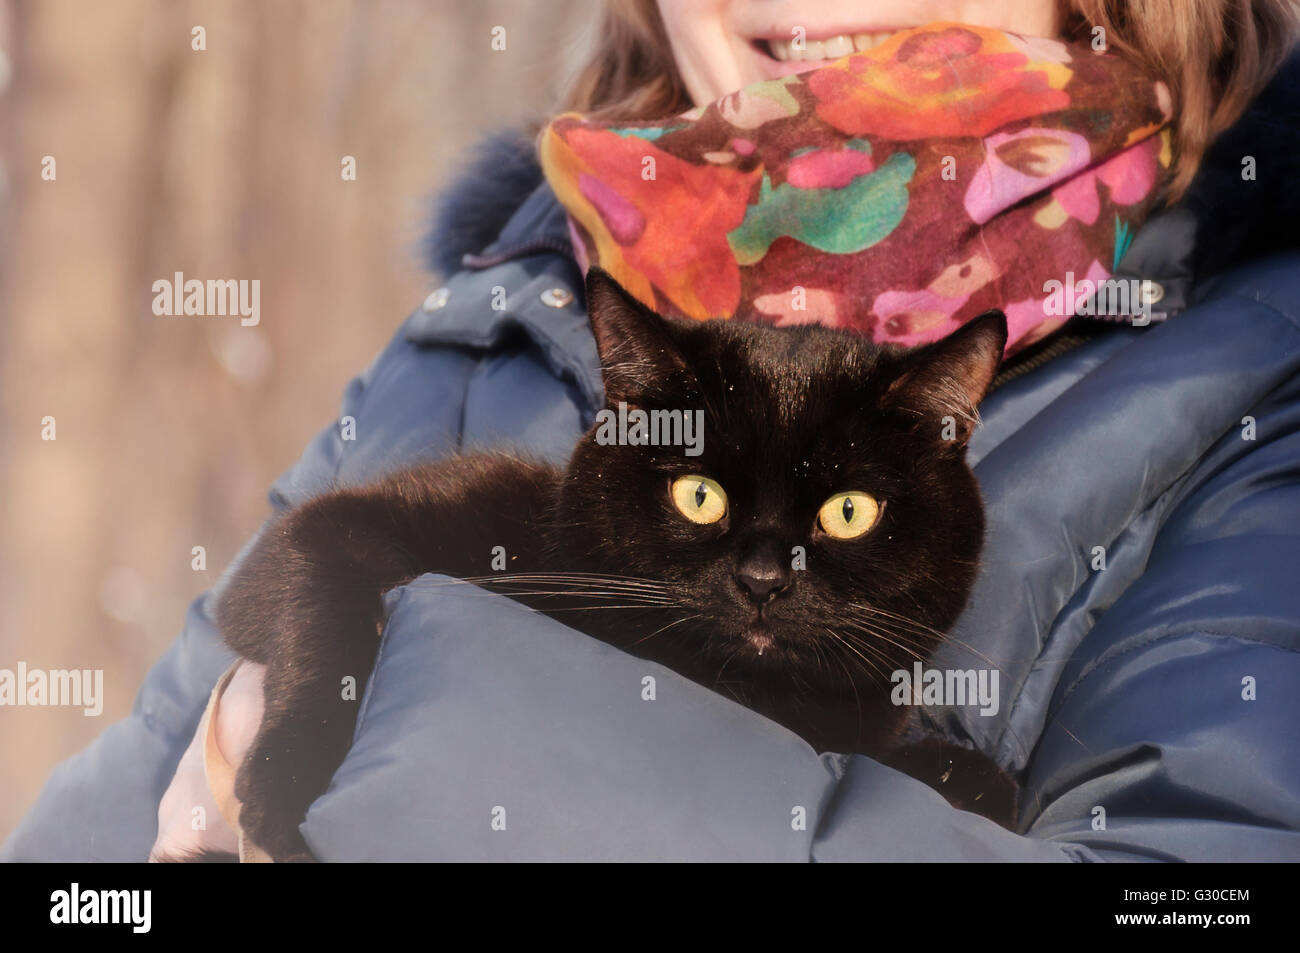 Woman keeps black cat on her hands Stock Photo